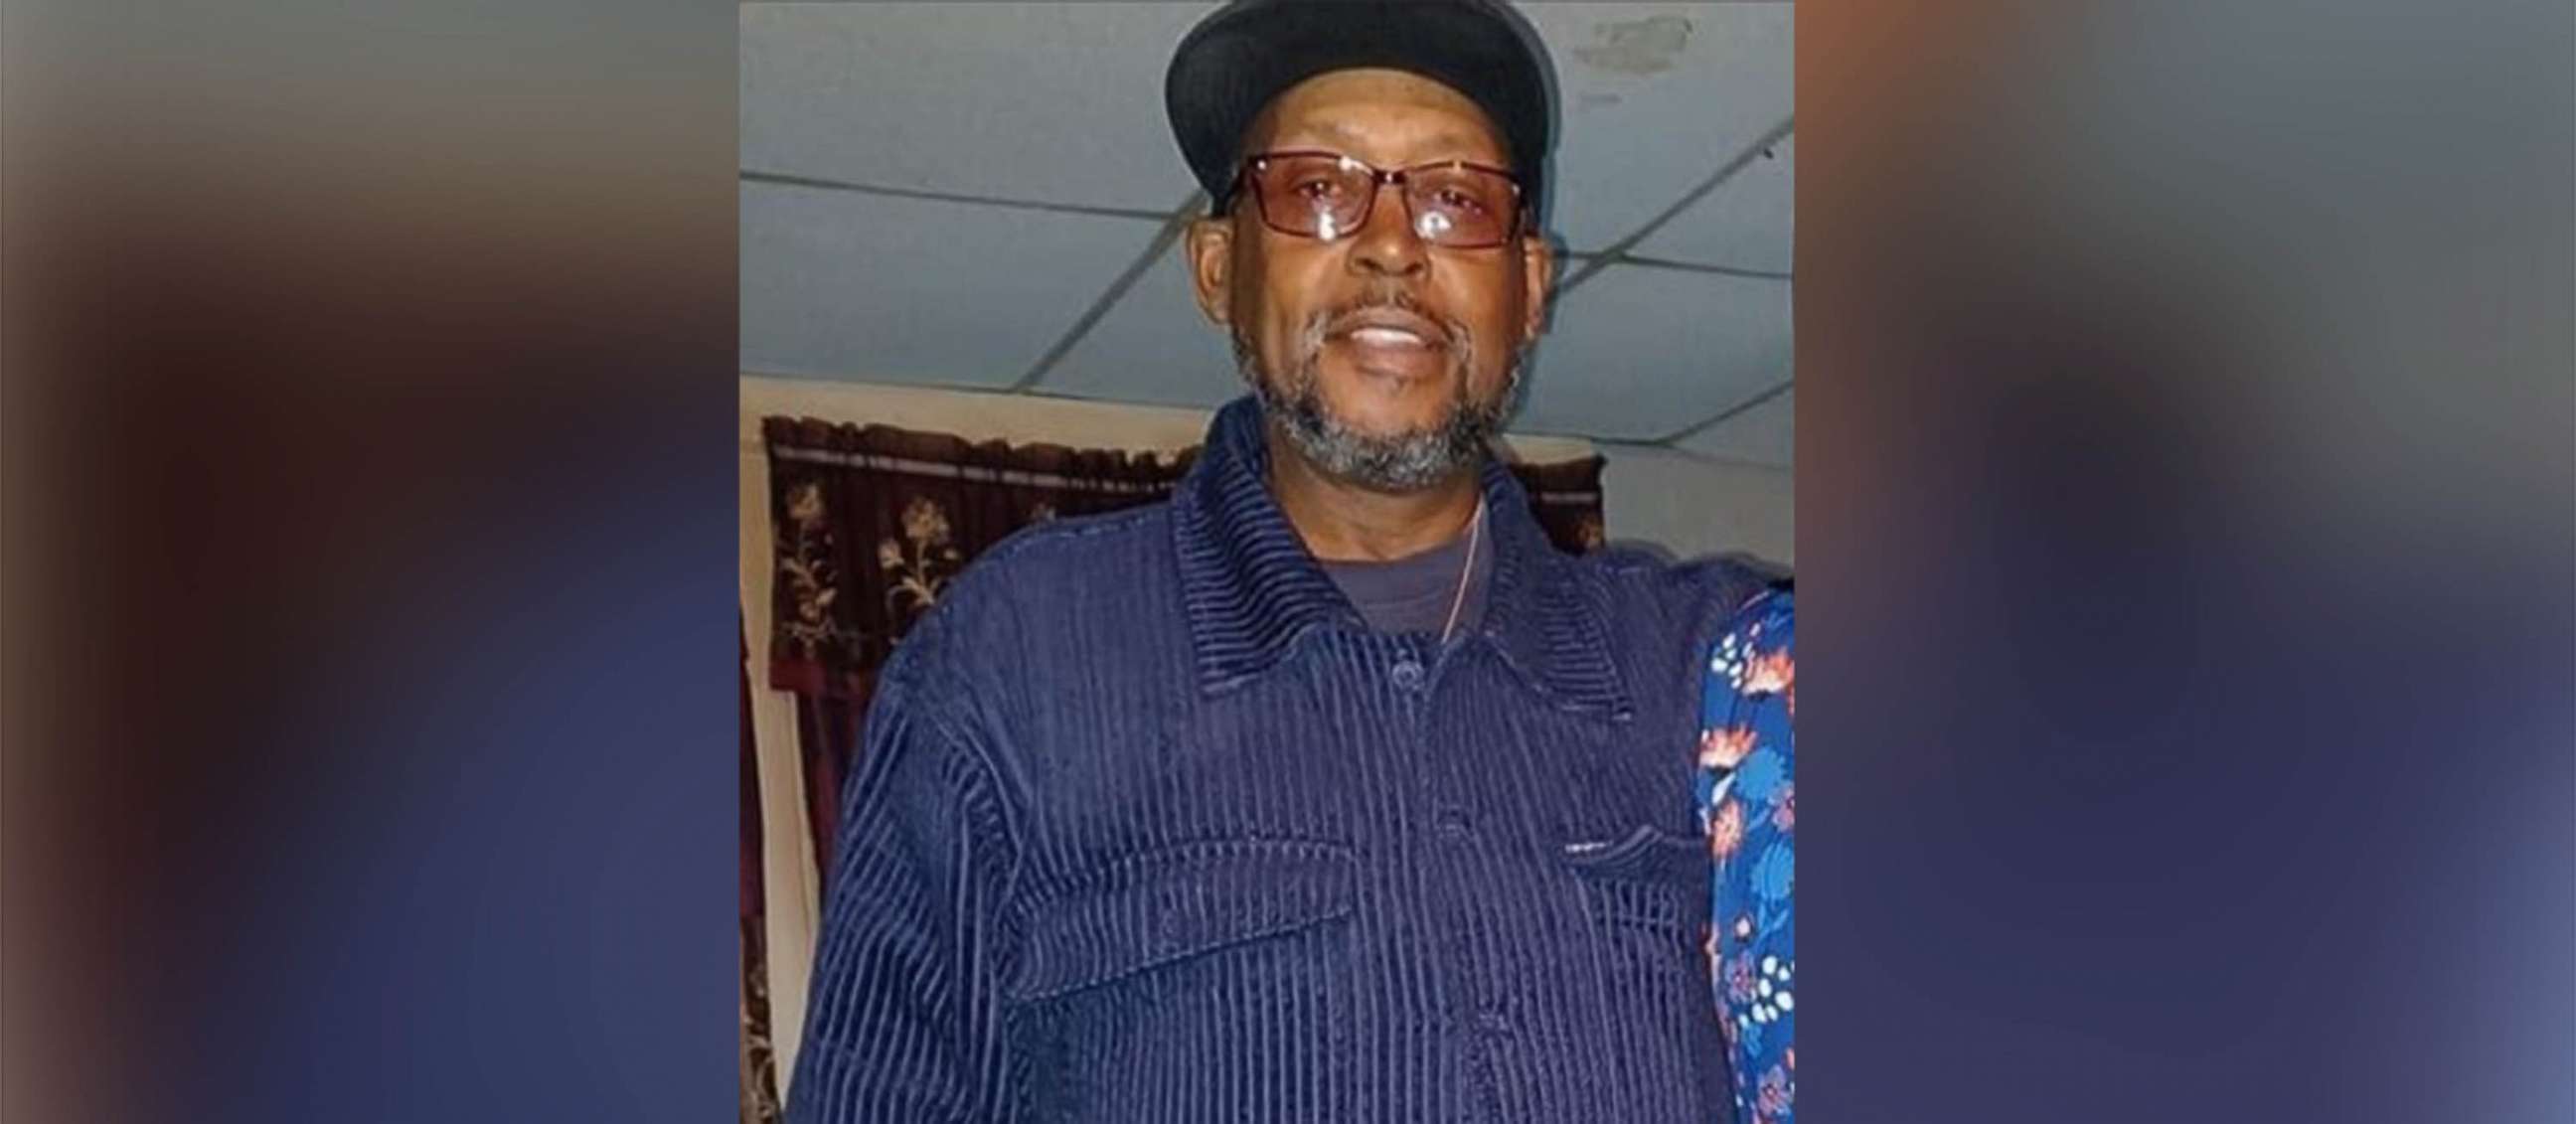 PHOTO: Heyward Patterson one of the victims of the May 14, 2022, shooting at a Tops supermarket in Buffalo, N.Y., is seen in an undated family photo.